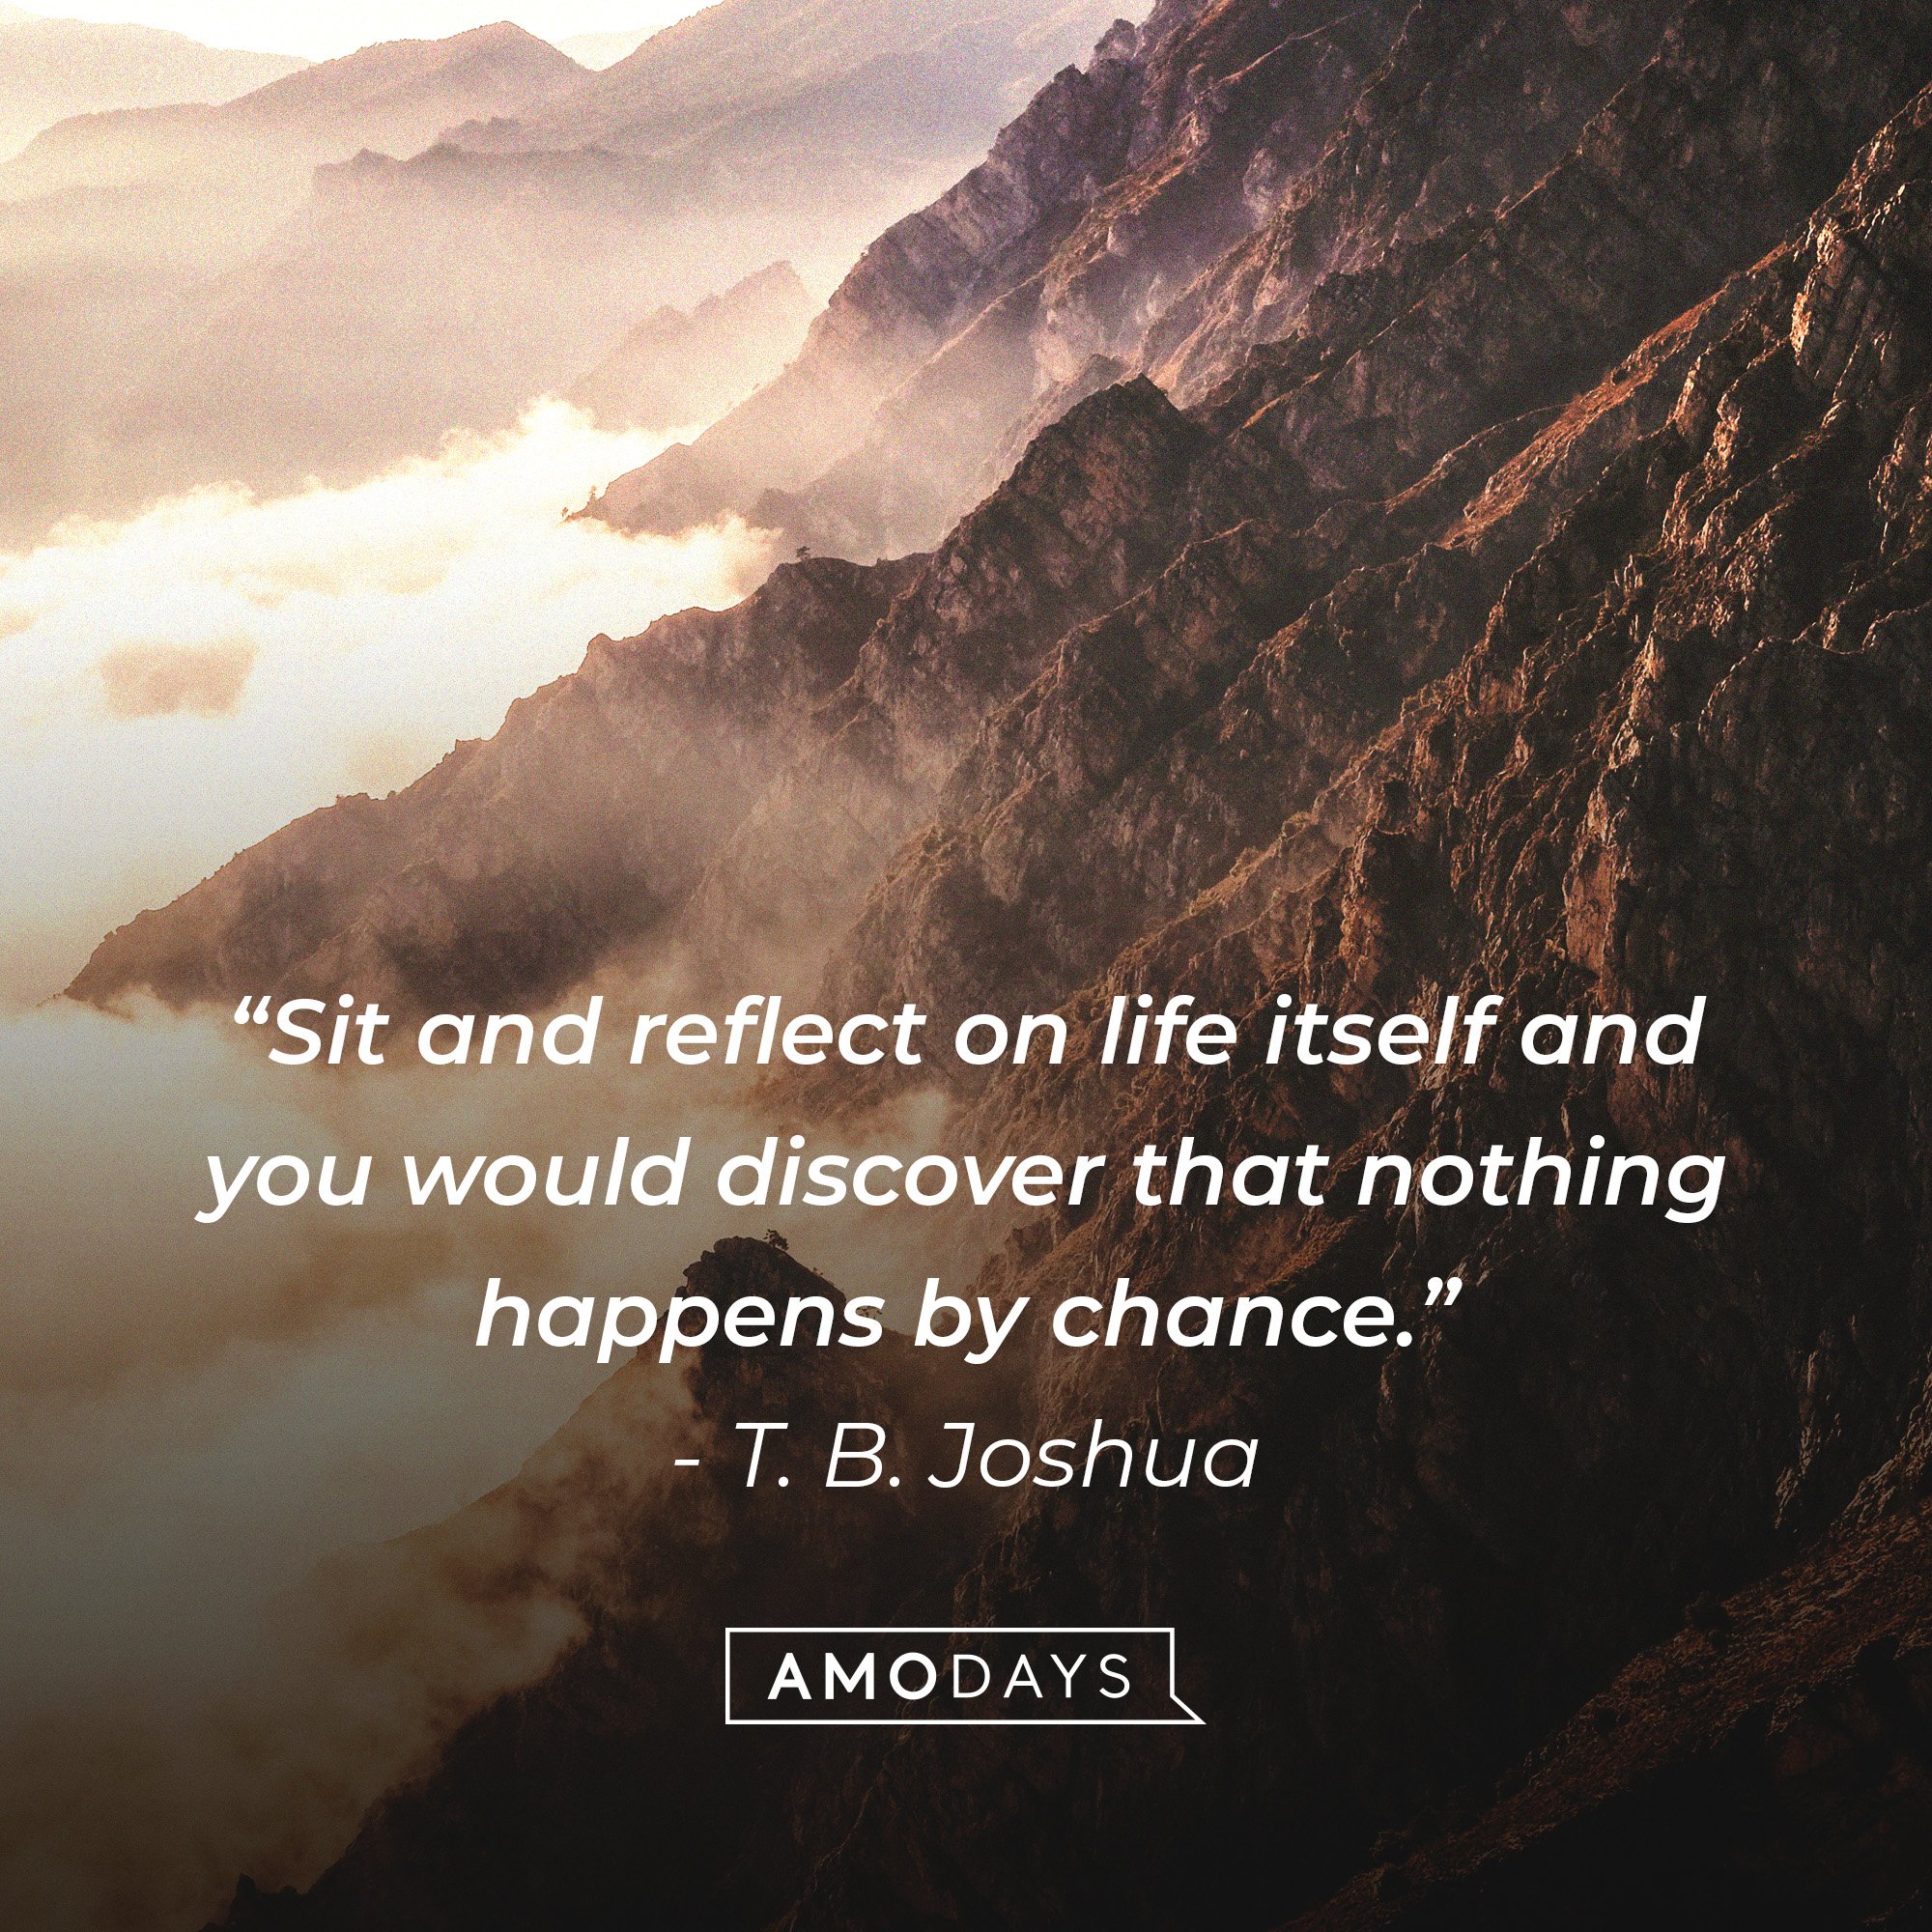 T.B. Joshua's quote: “Sit and reflect on life itself and you would discover that nothing happens by chance.” | Image: AmoDays